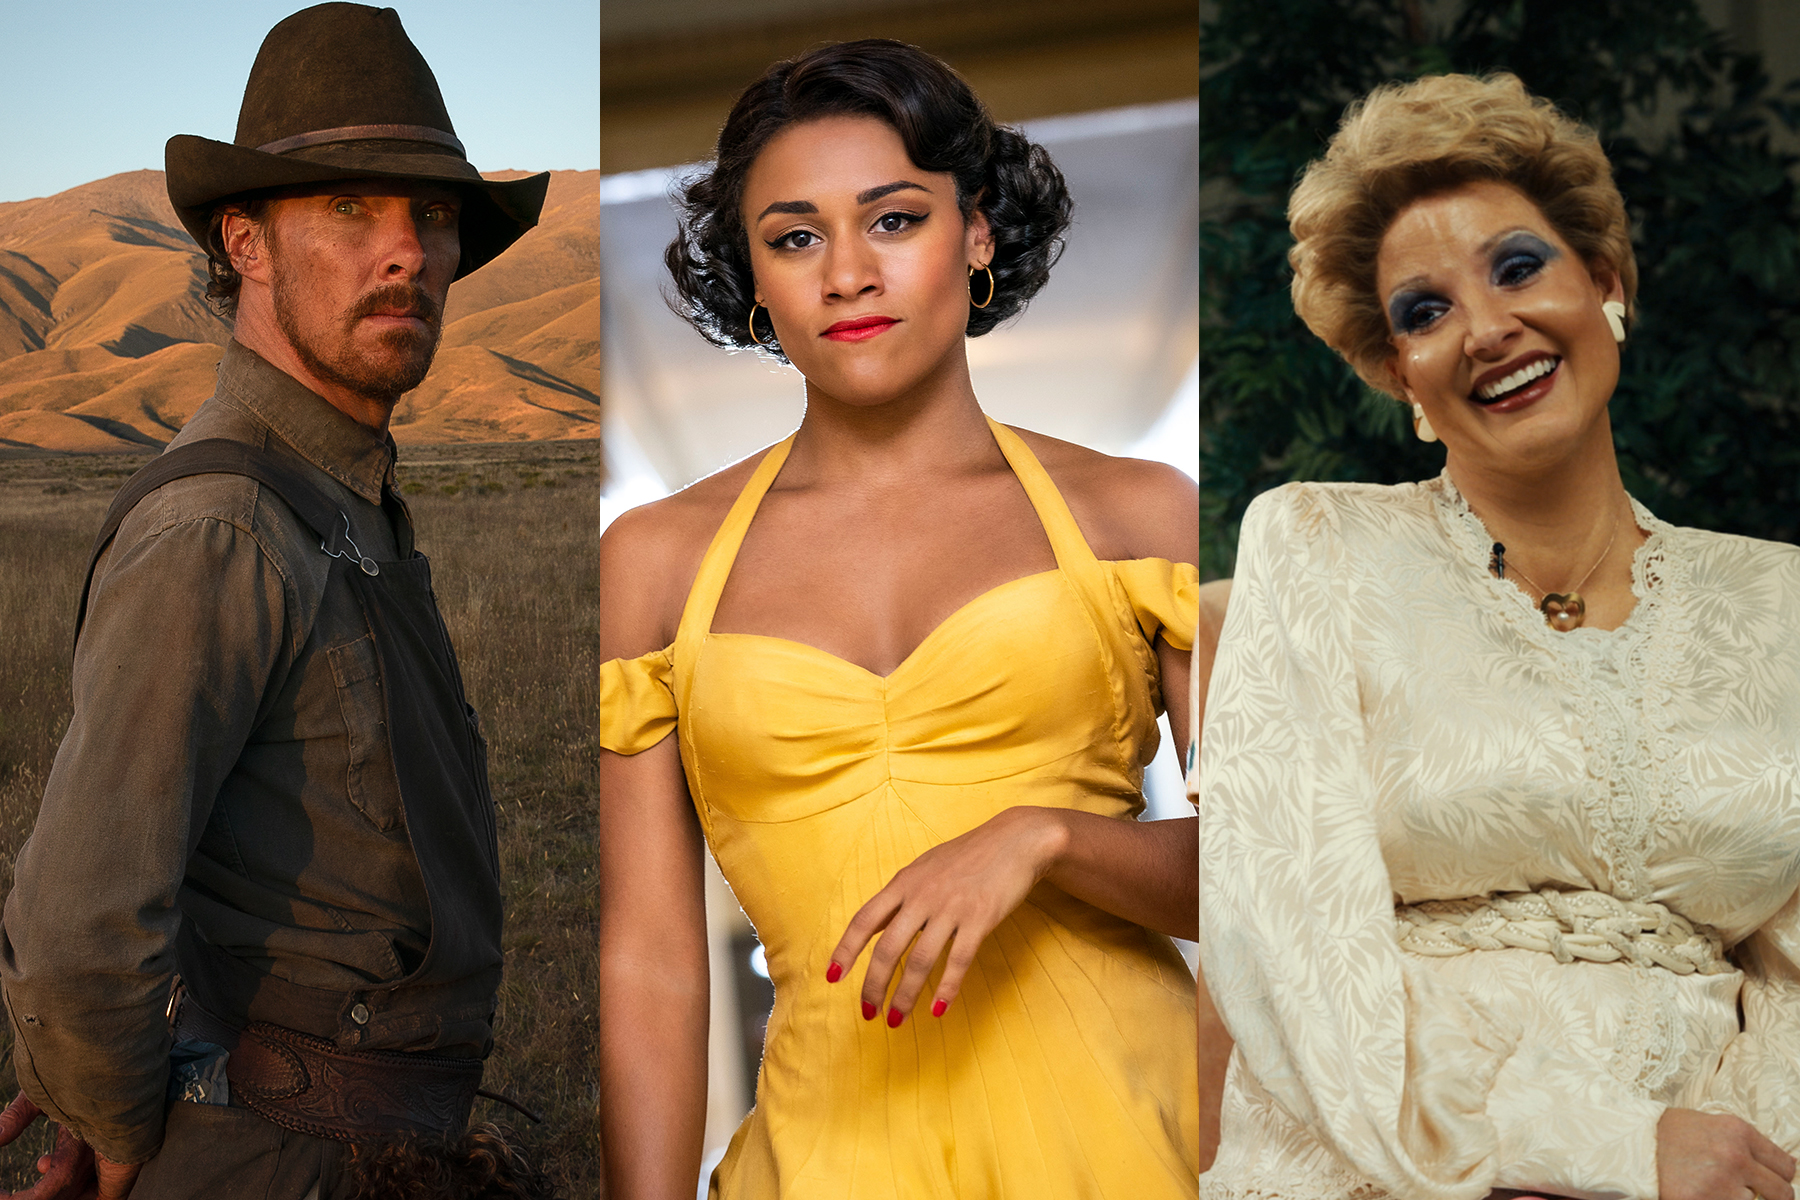 2022 Oscars Predictions: Who Will Win, and What Should Win